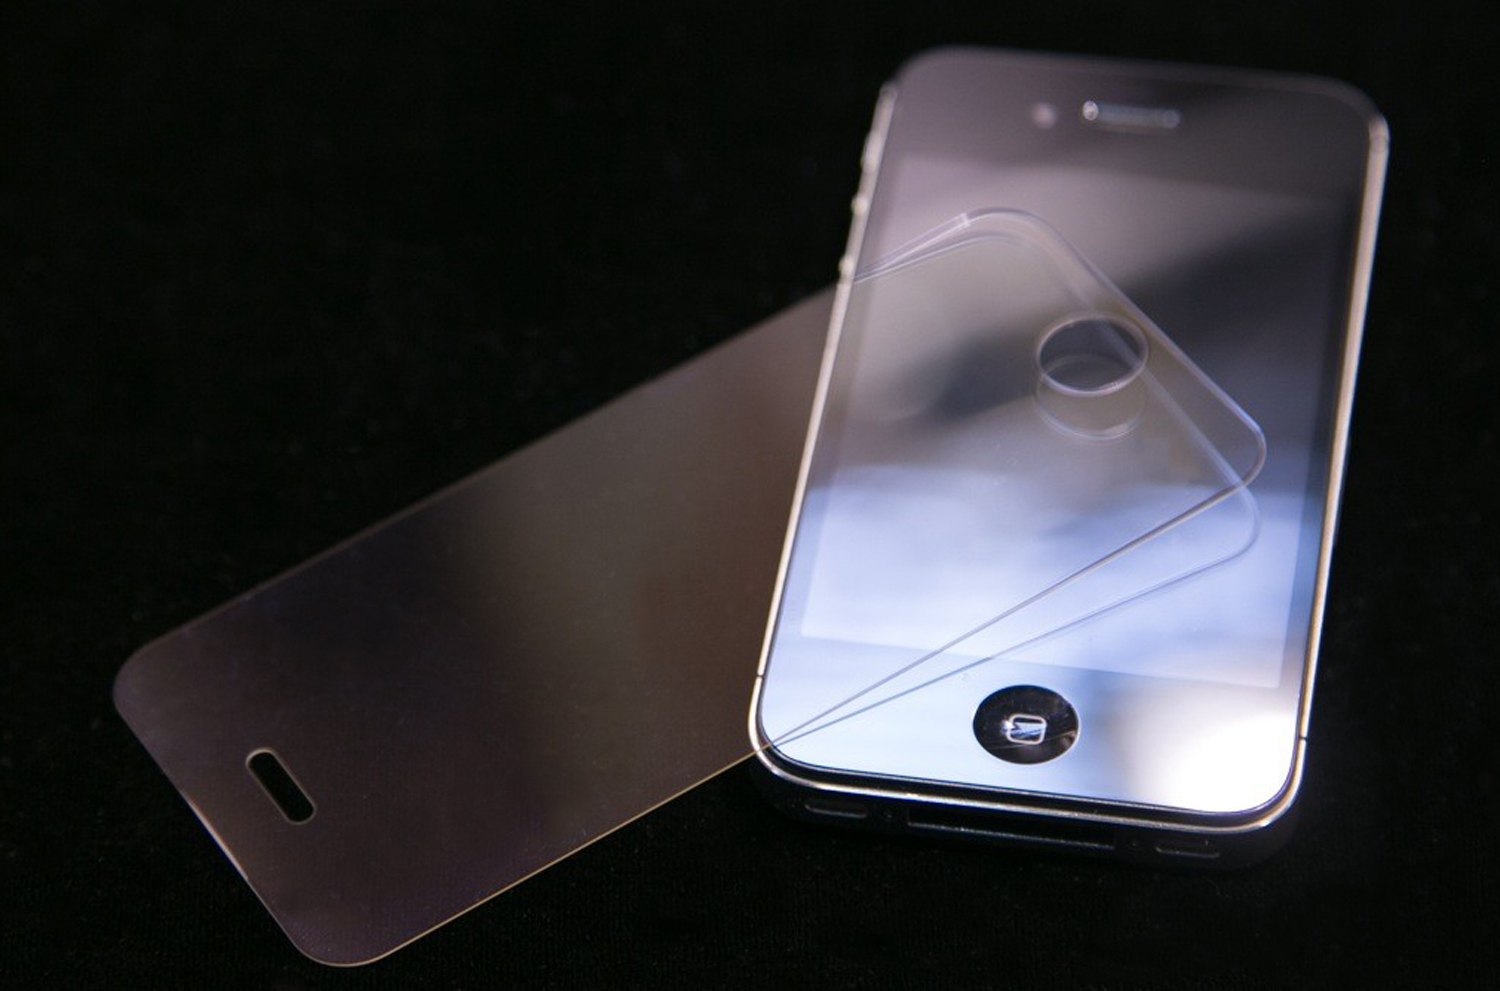 Forget Gorilla Glass – Sapphire Screens are Coming